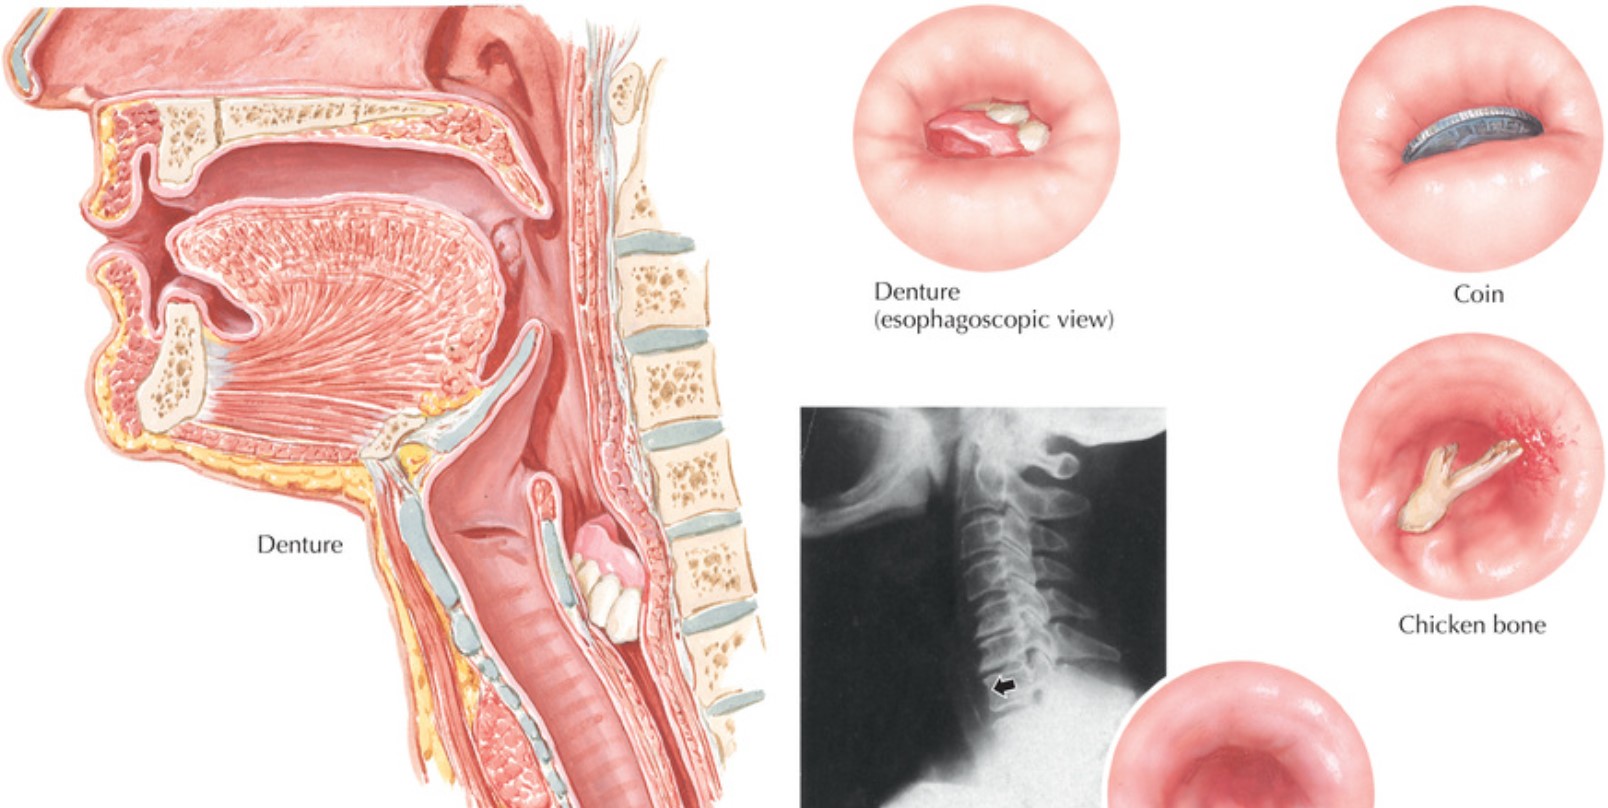 Foreign Bodies in the Esophagus: Causes, Symptoms, and Treatments